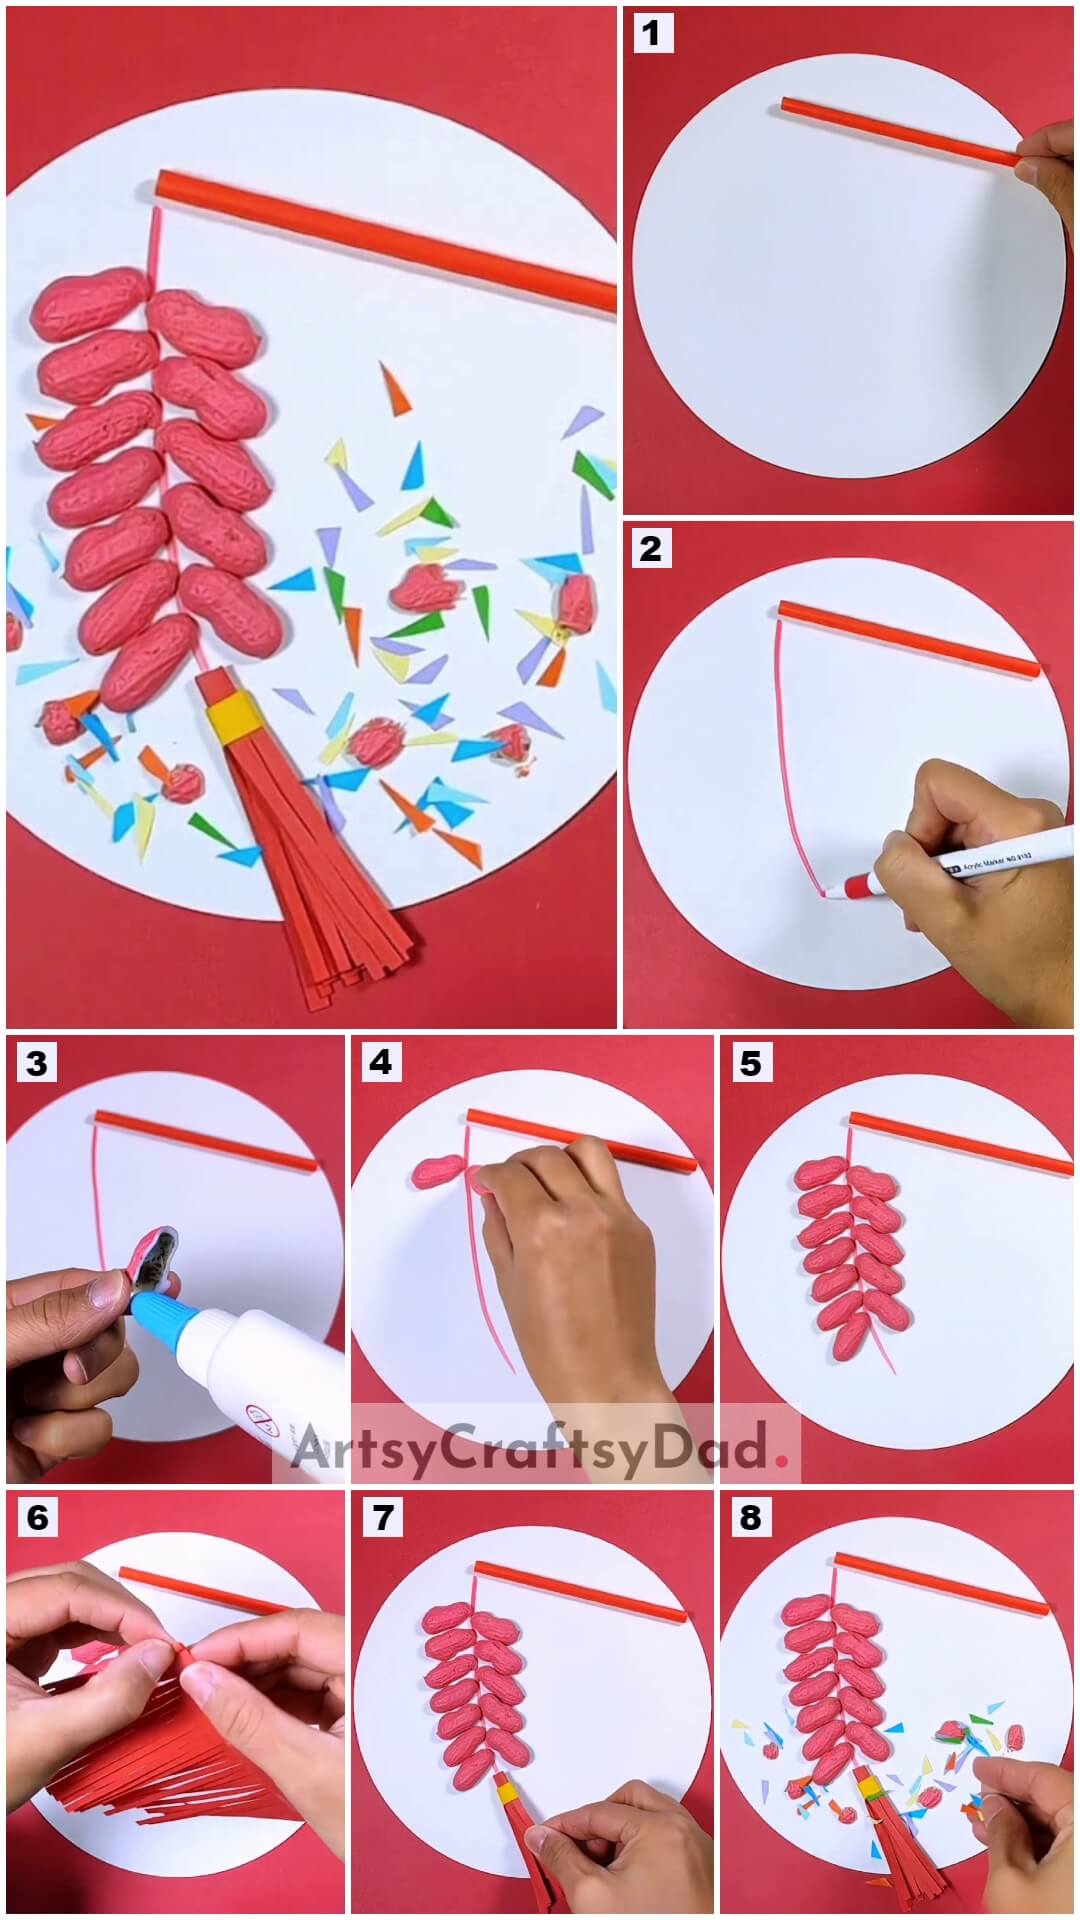 Peanut Shell Chinese Firecracker Craft Tutorial for New Year